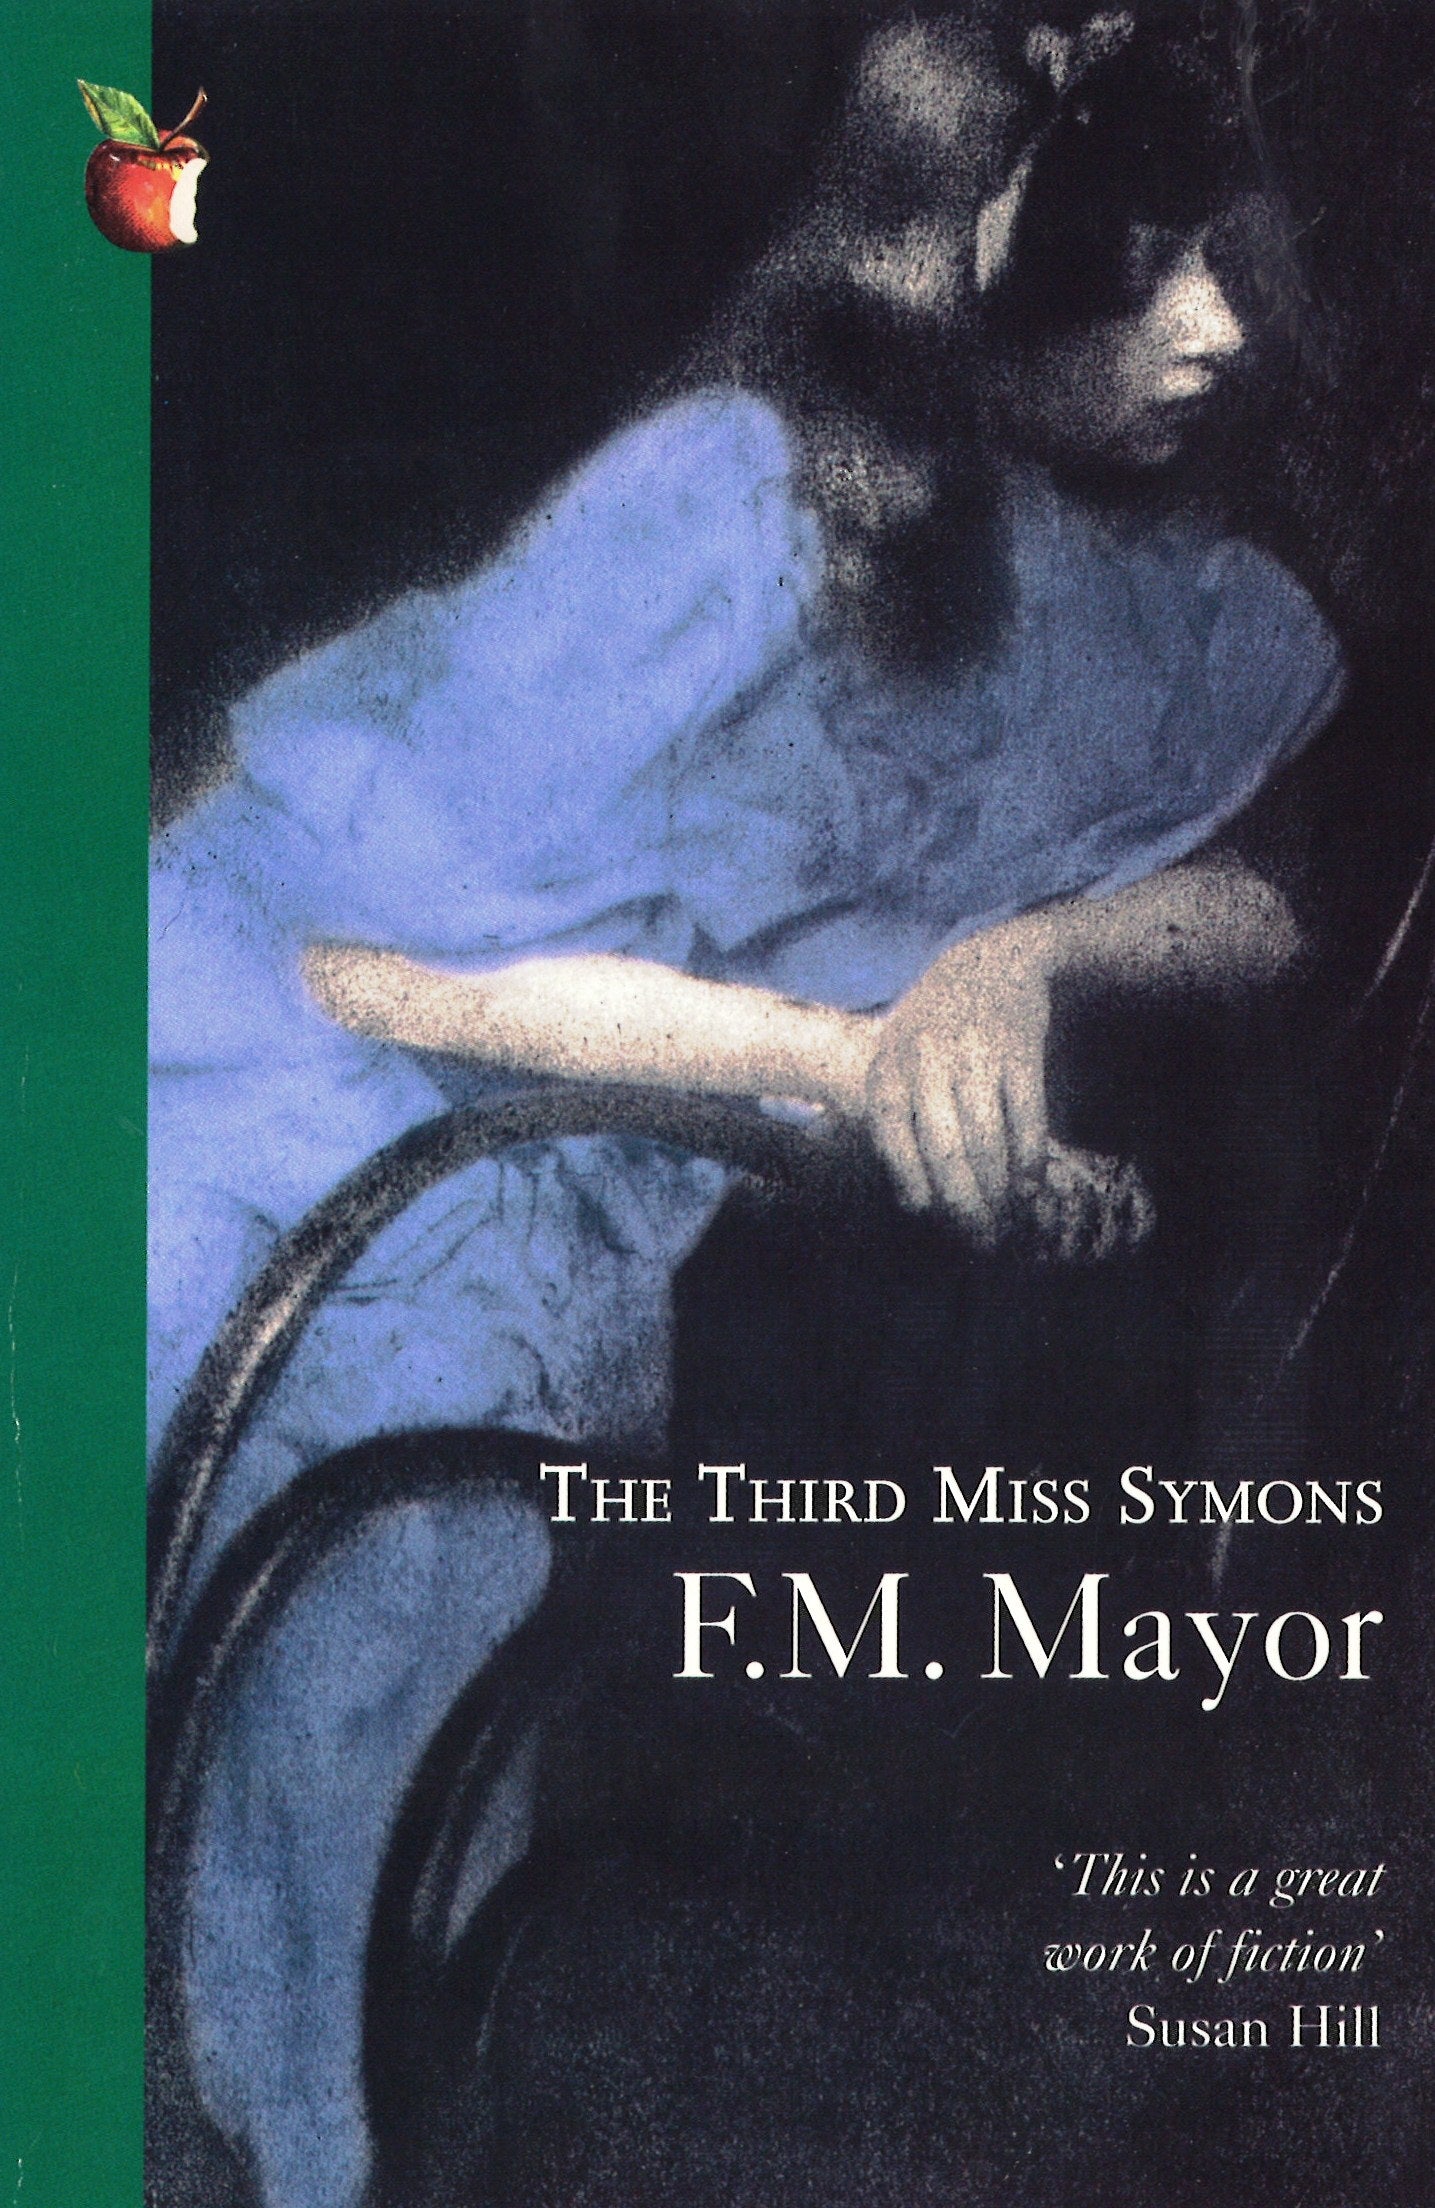 The Third Miss Symons by F.M. Mayor